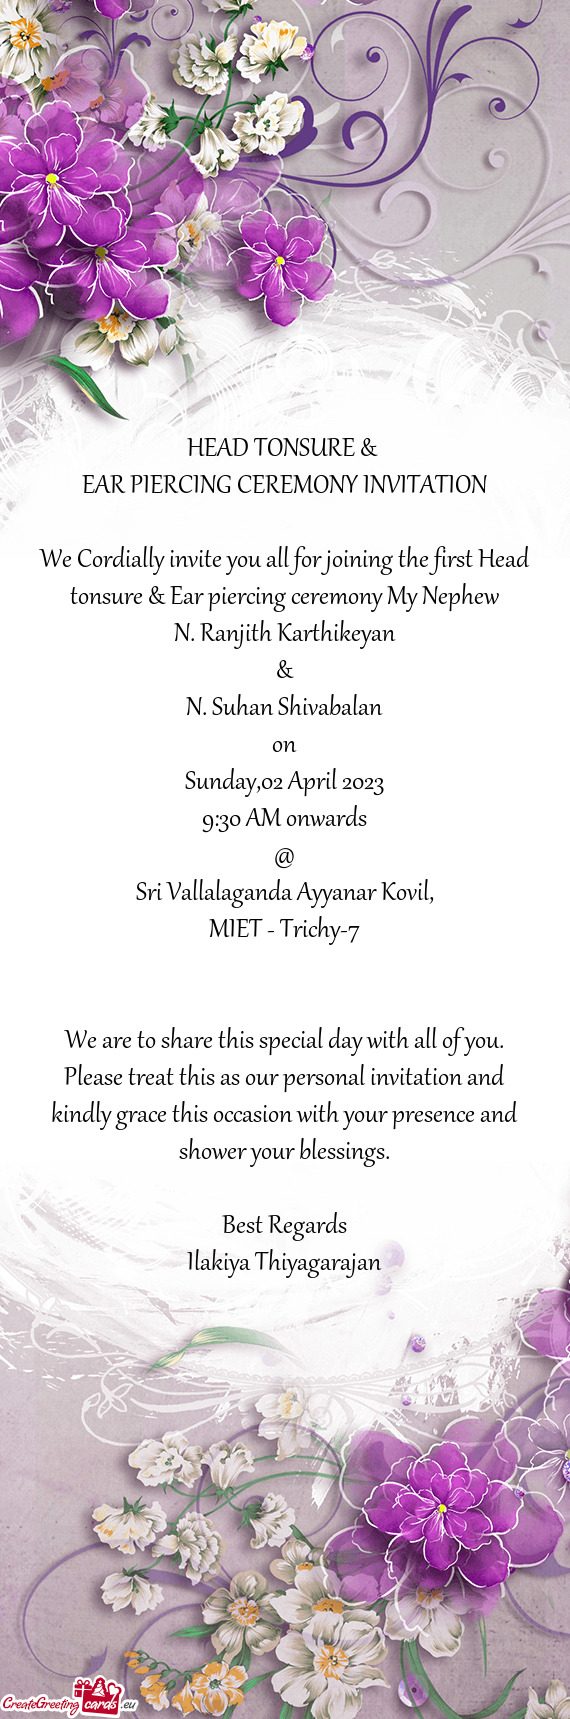 We Cordially invite you all for joining the first Head tonsure & Ear piercing ceremony My Nephew